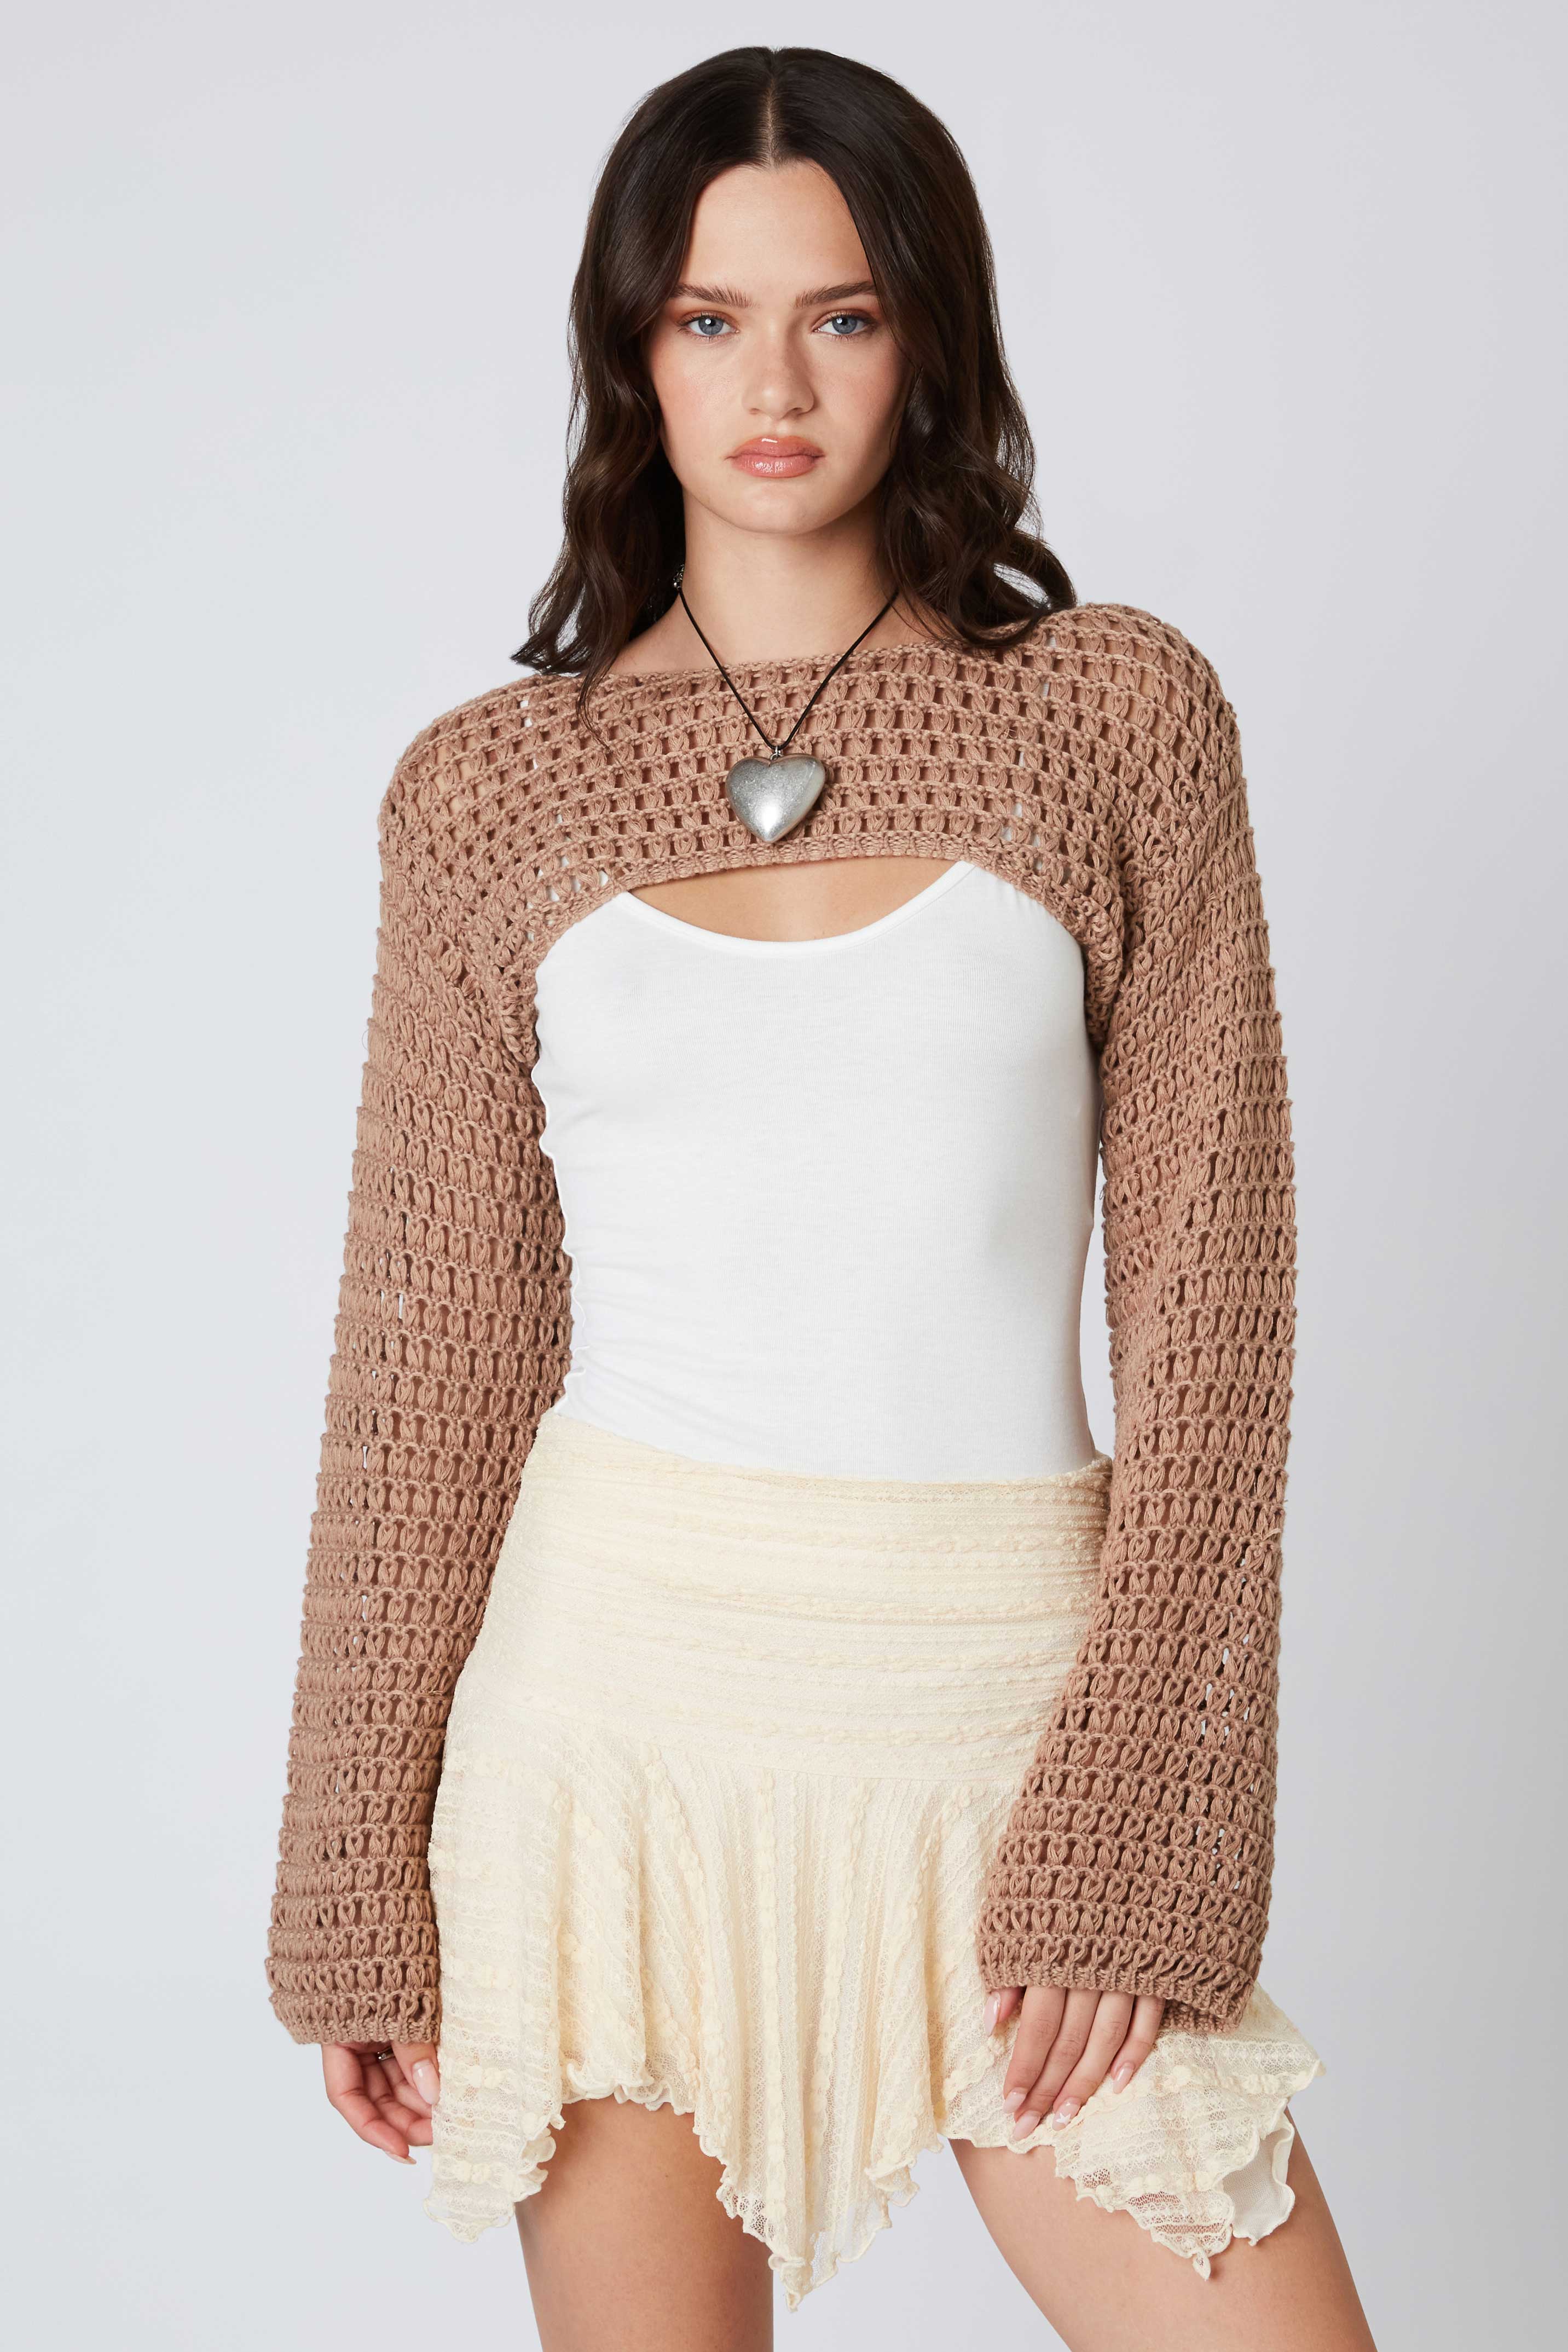 Open Knit Shrug in Mocha Front View